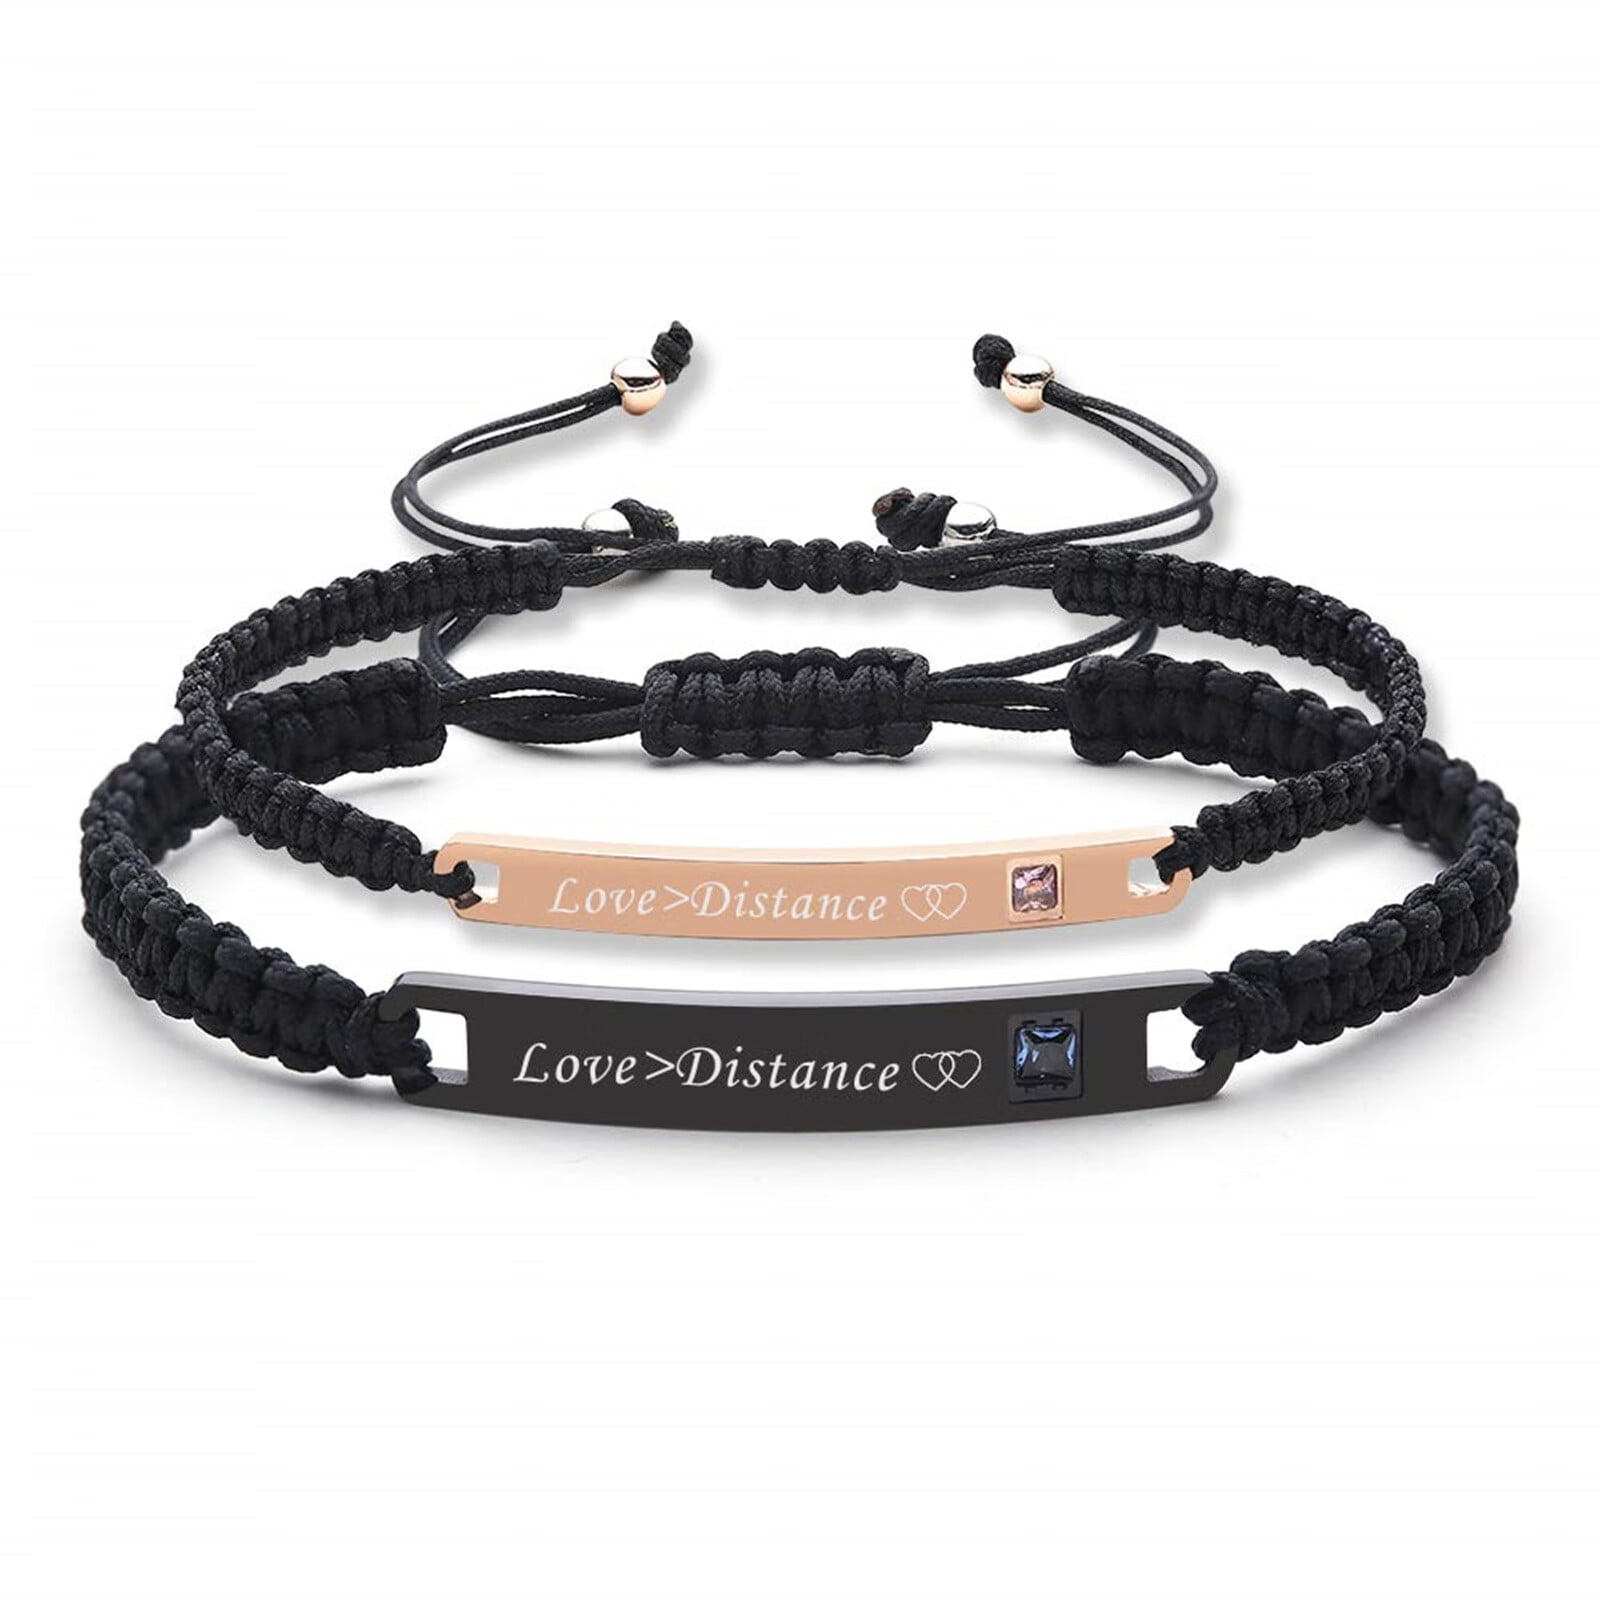 20 Matching Bracelets for Couples in Committed Relationships